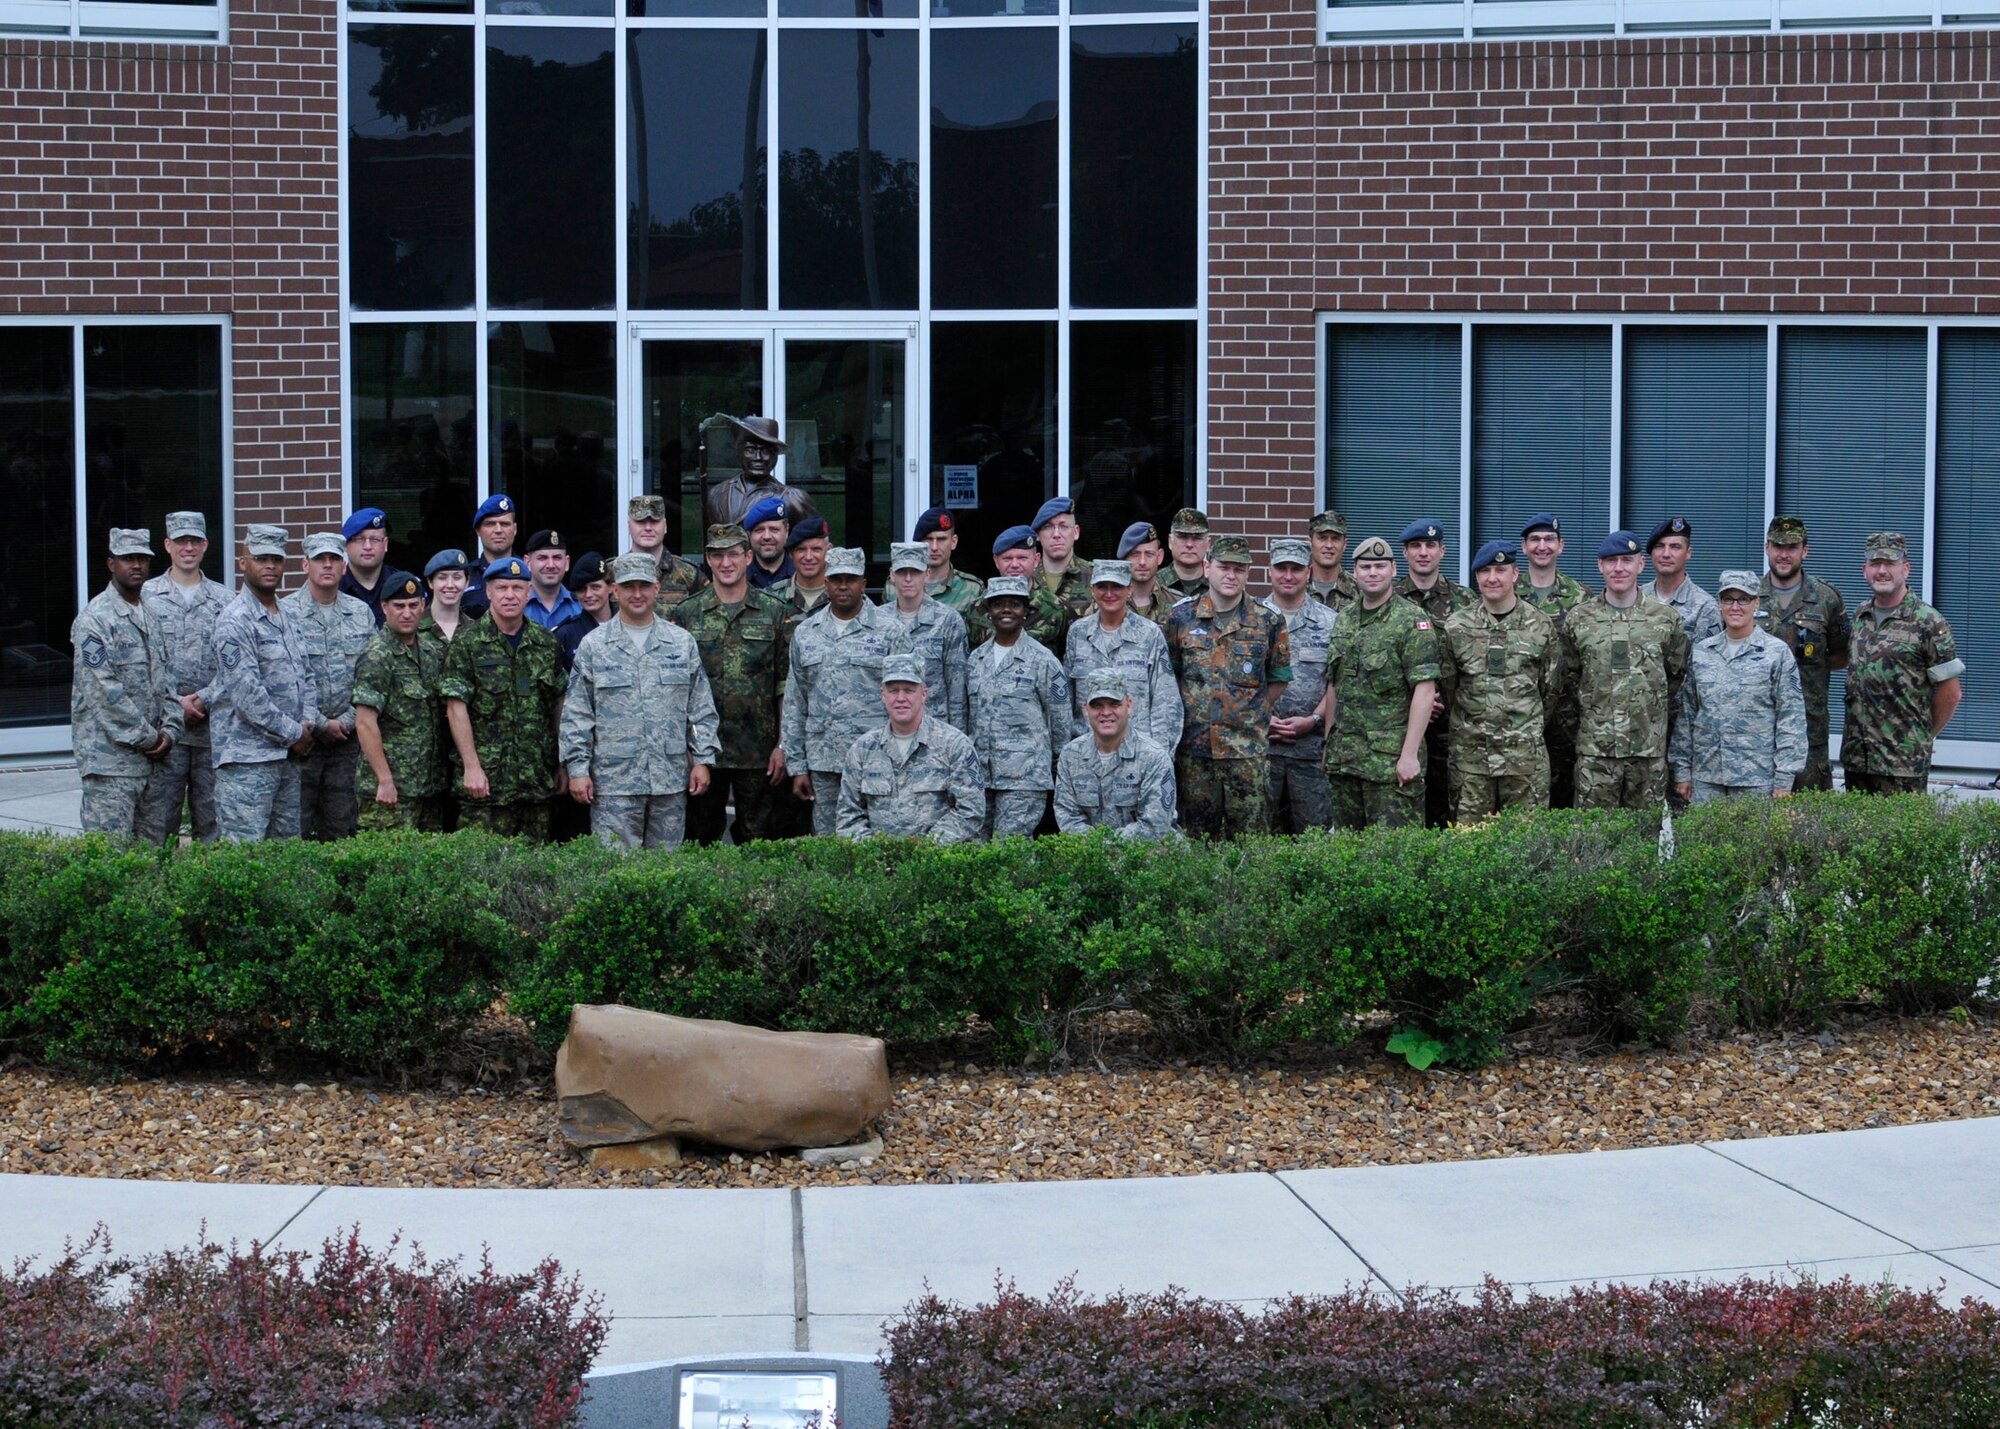 NATO class members of the 2012 International NCO Leadership Development Symposium (INLEAD) held July 8-13, 2012 at the Air National Guard Training and Education Center, McGhee-Tyson ANG Base, Tenn. (National Guard photo)